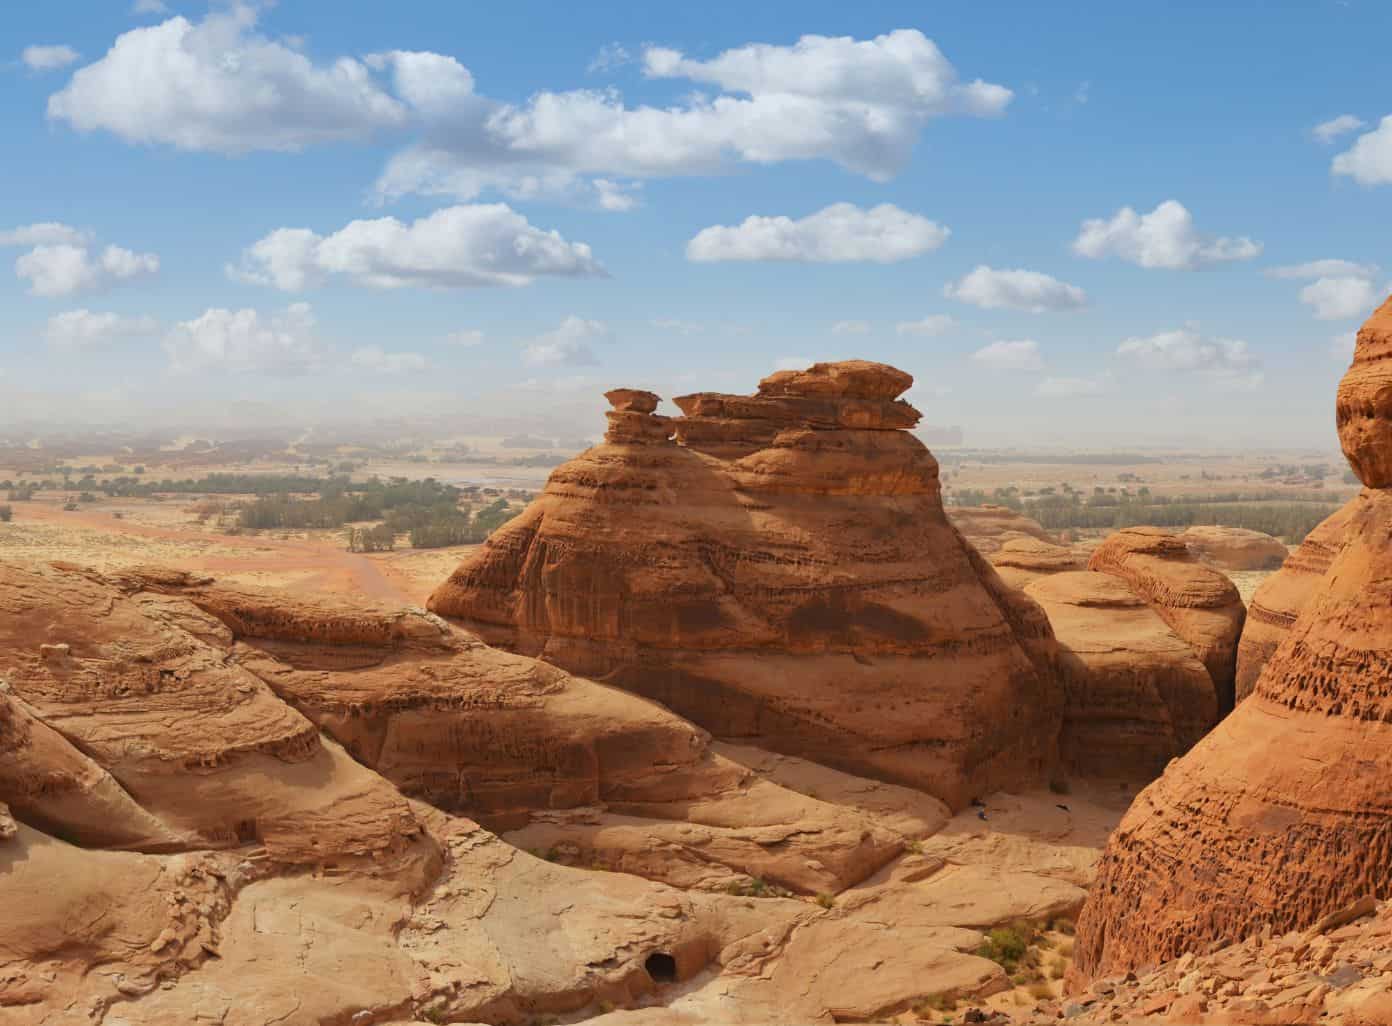 10 Exciting Things to Do in Saudi Arabia